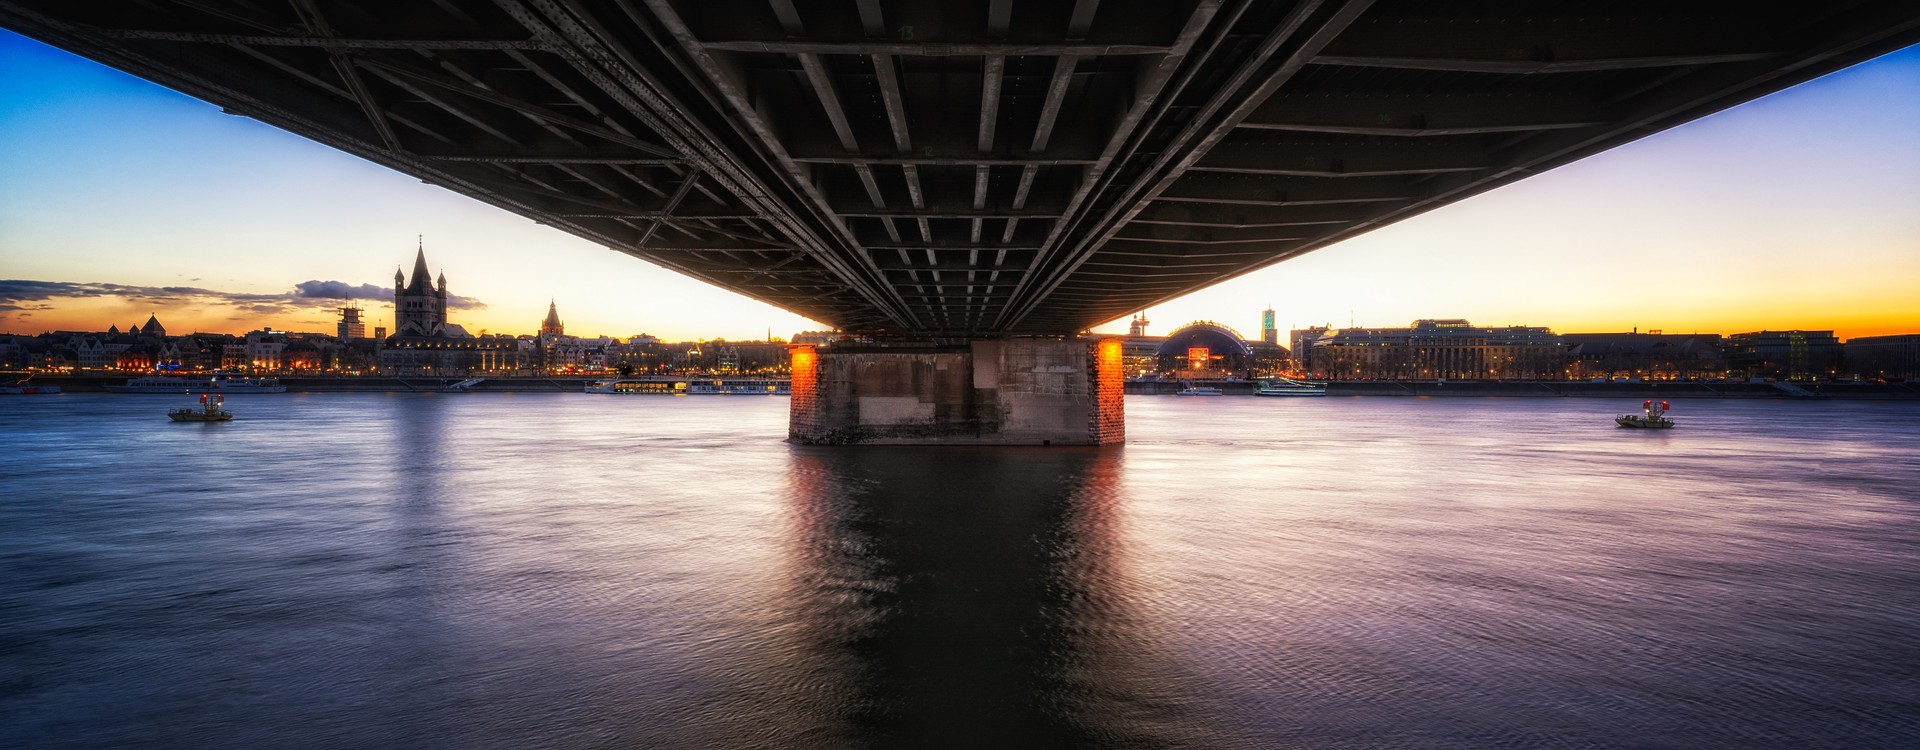 a_view_of_a_bridge_over_a_body_of_water - ©tama66